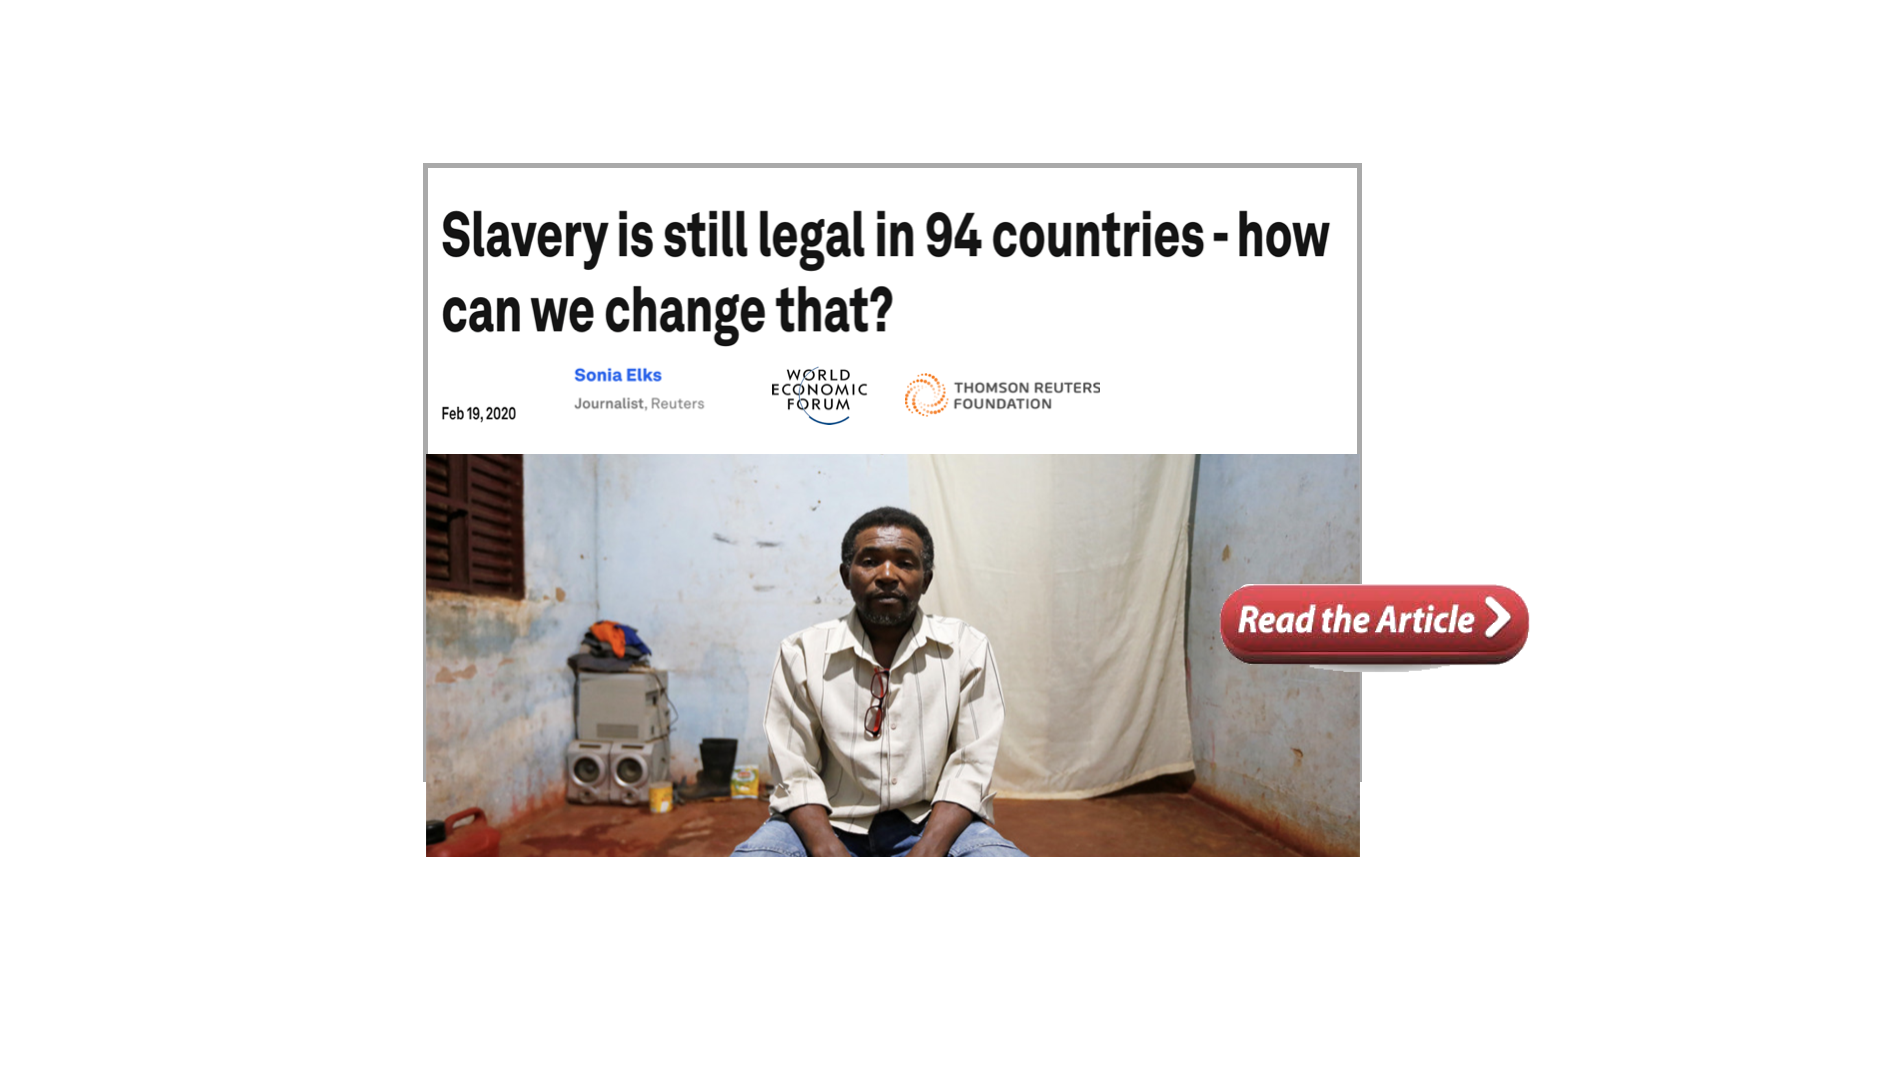 Slavery – still legal in 94 countries